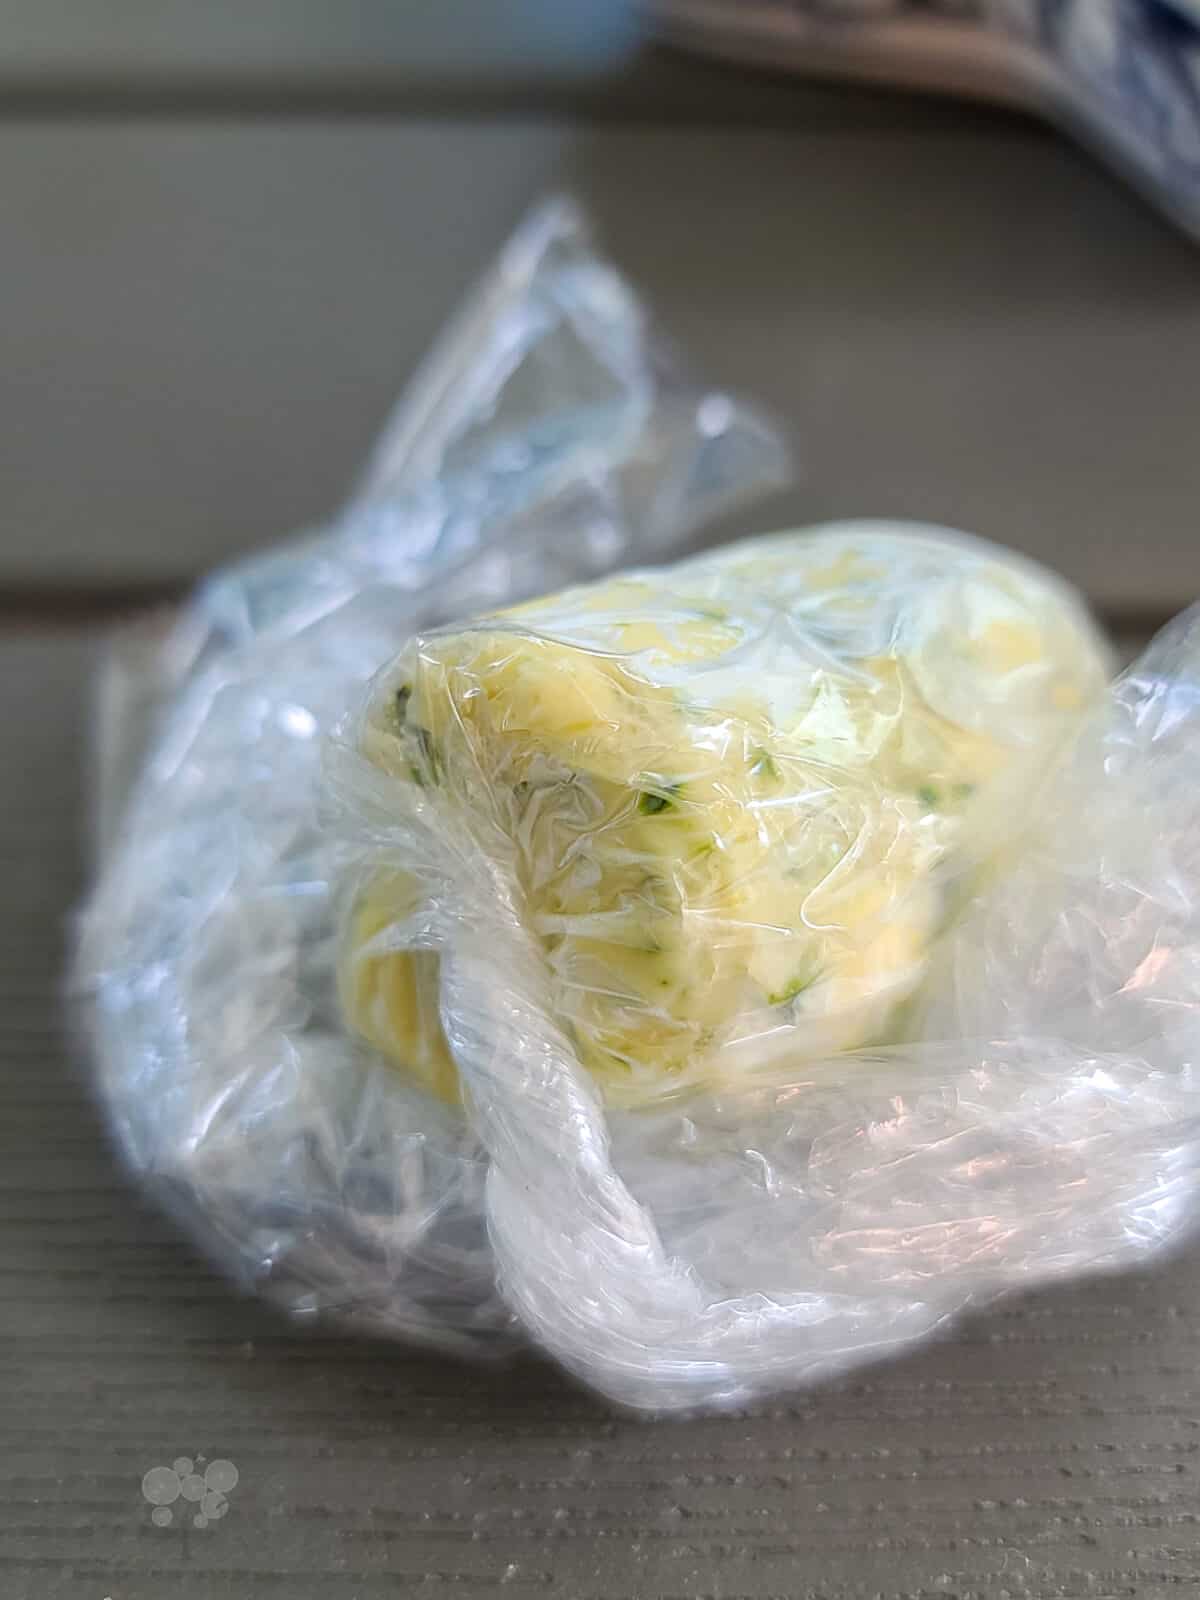 Lemon butter mixture wrapped in cling film